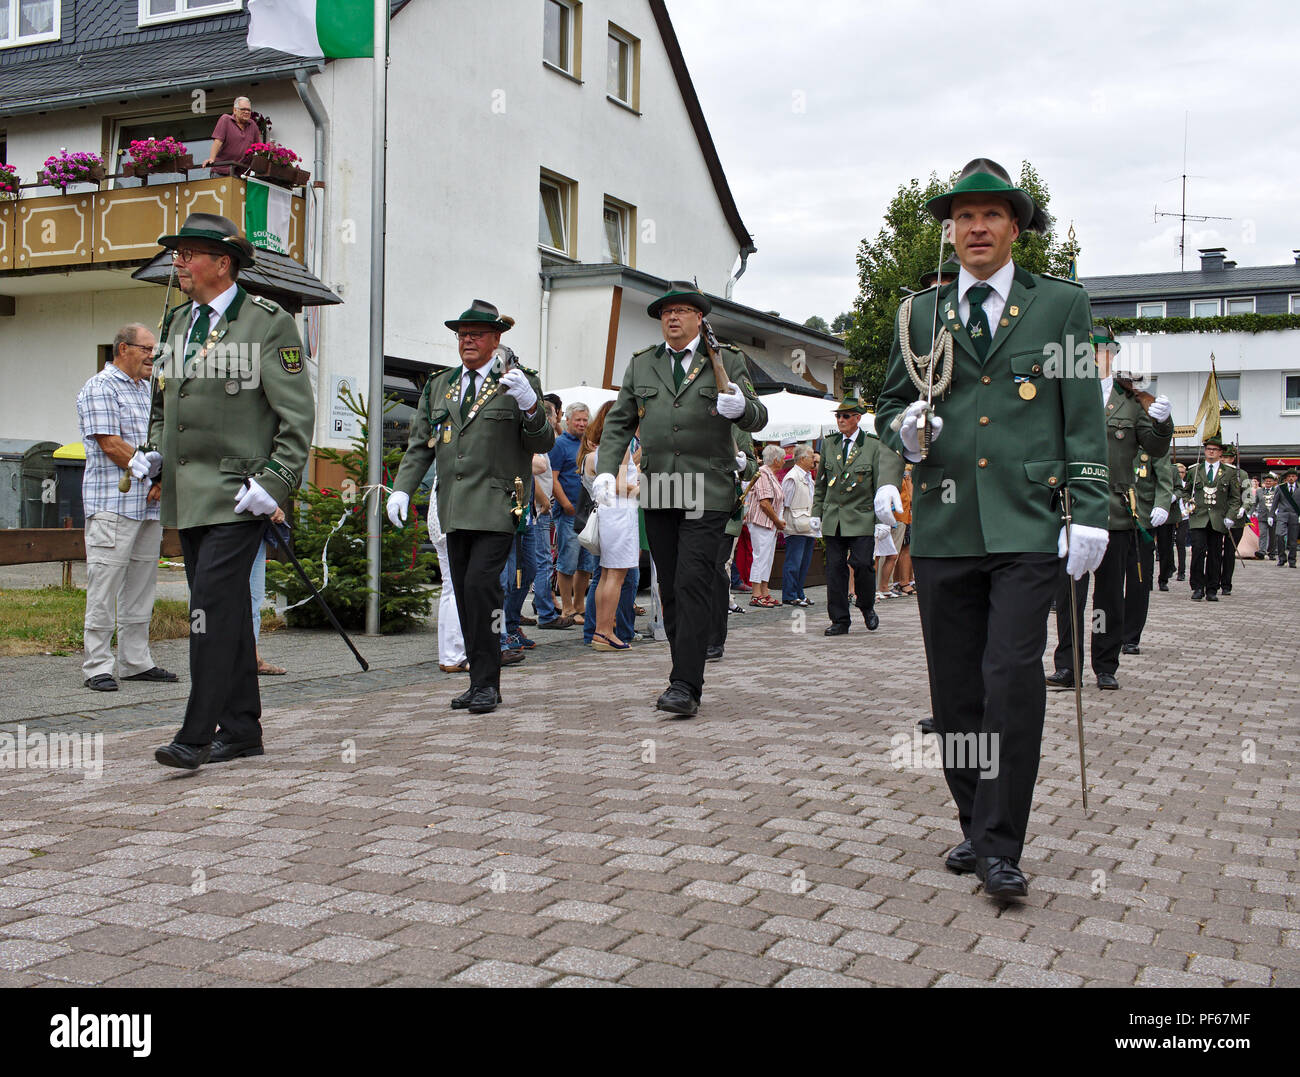 Usseln, Germany - July 30th, 2018 - Rifle club members parading in their traditional green uniforms at the marksmen's fair Stock Photo